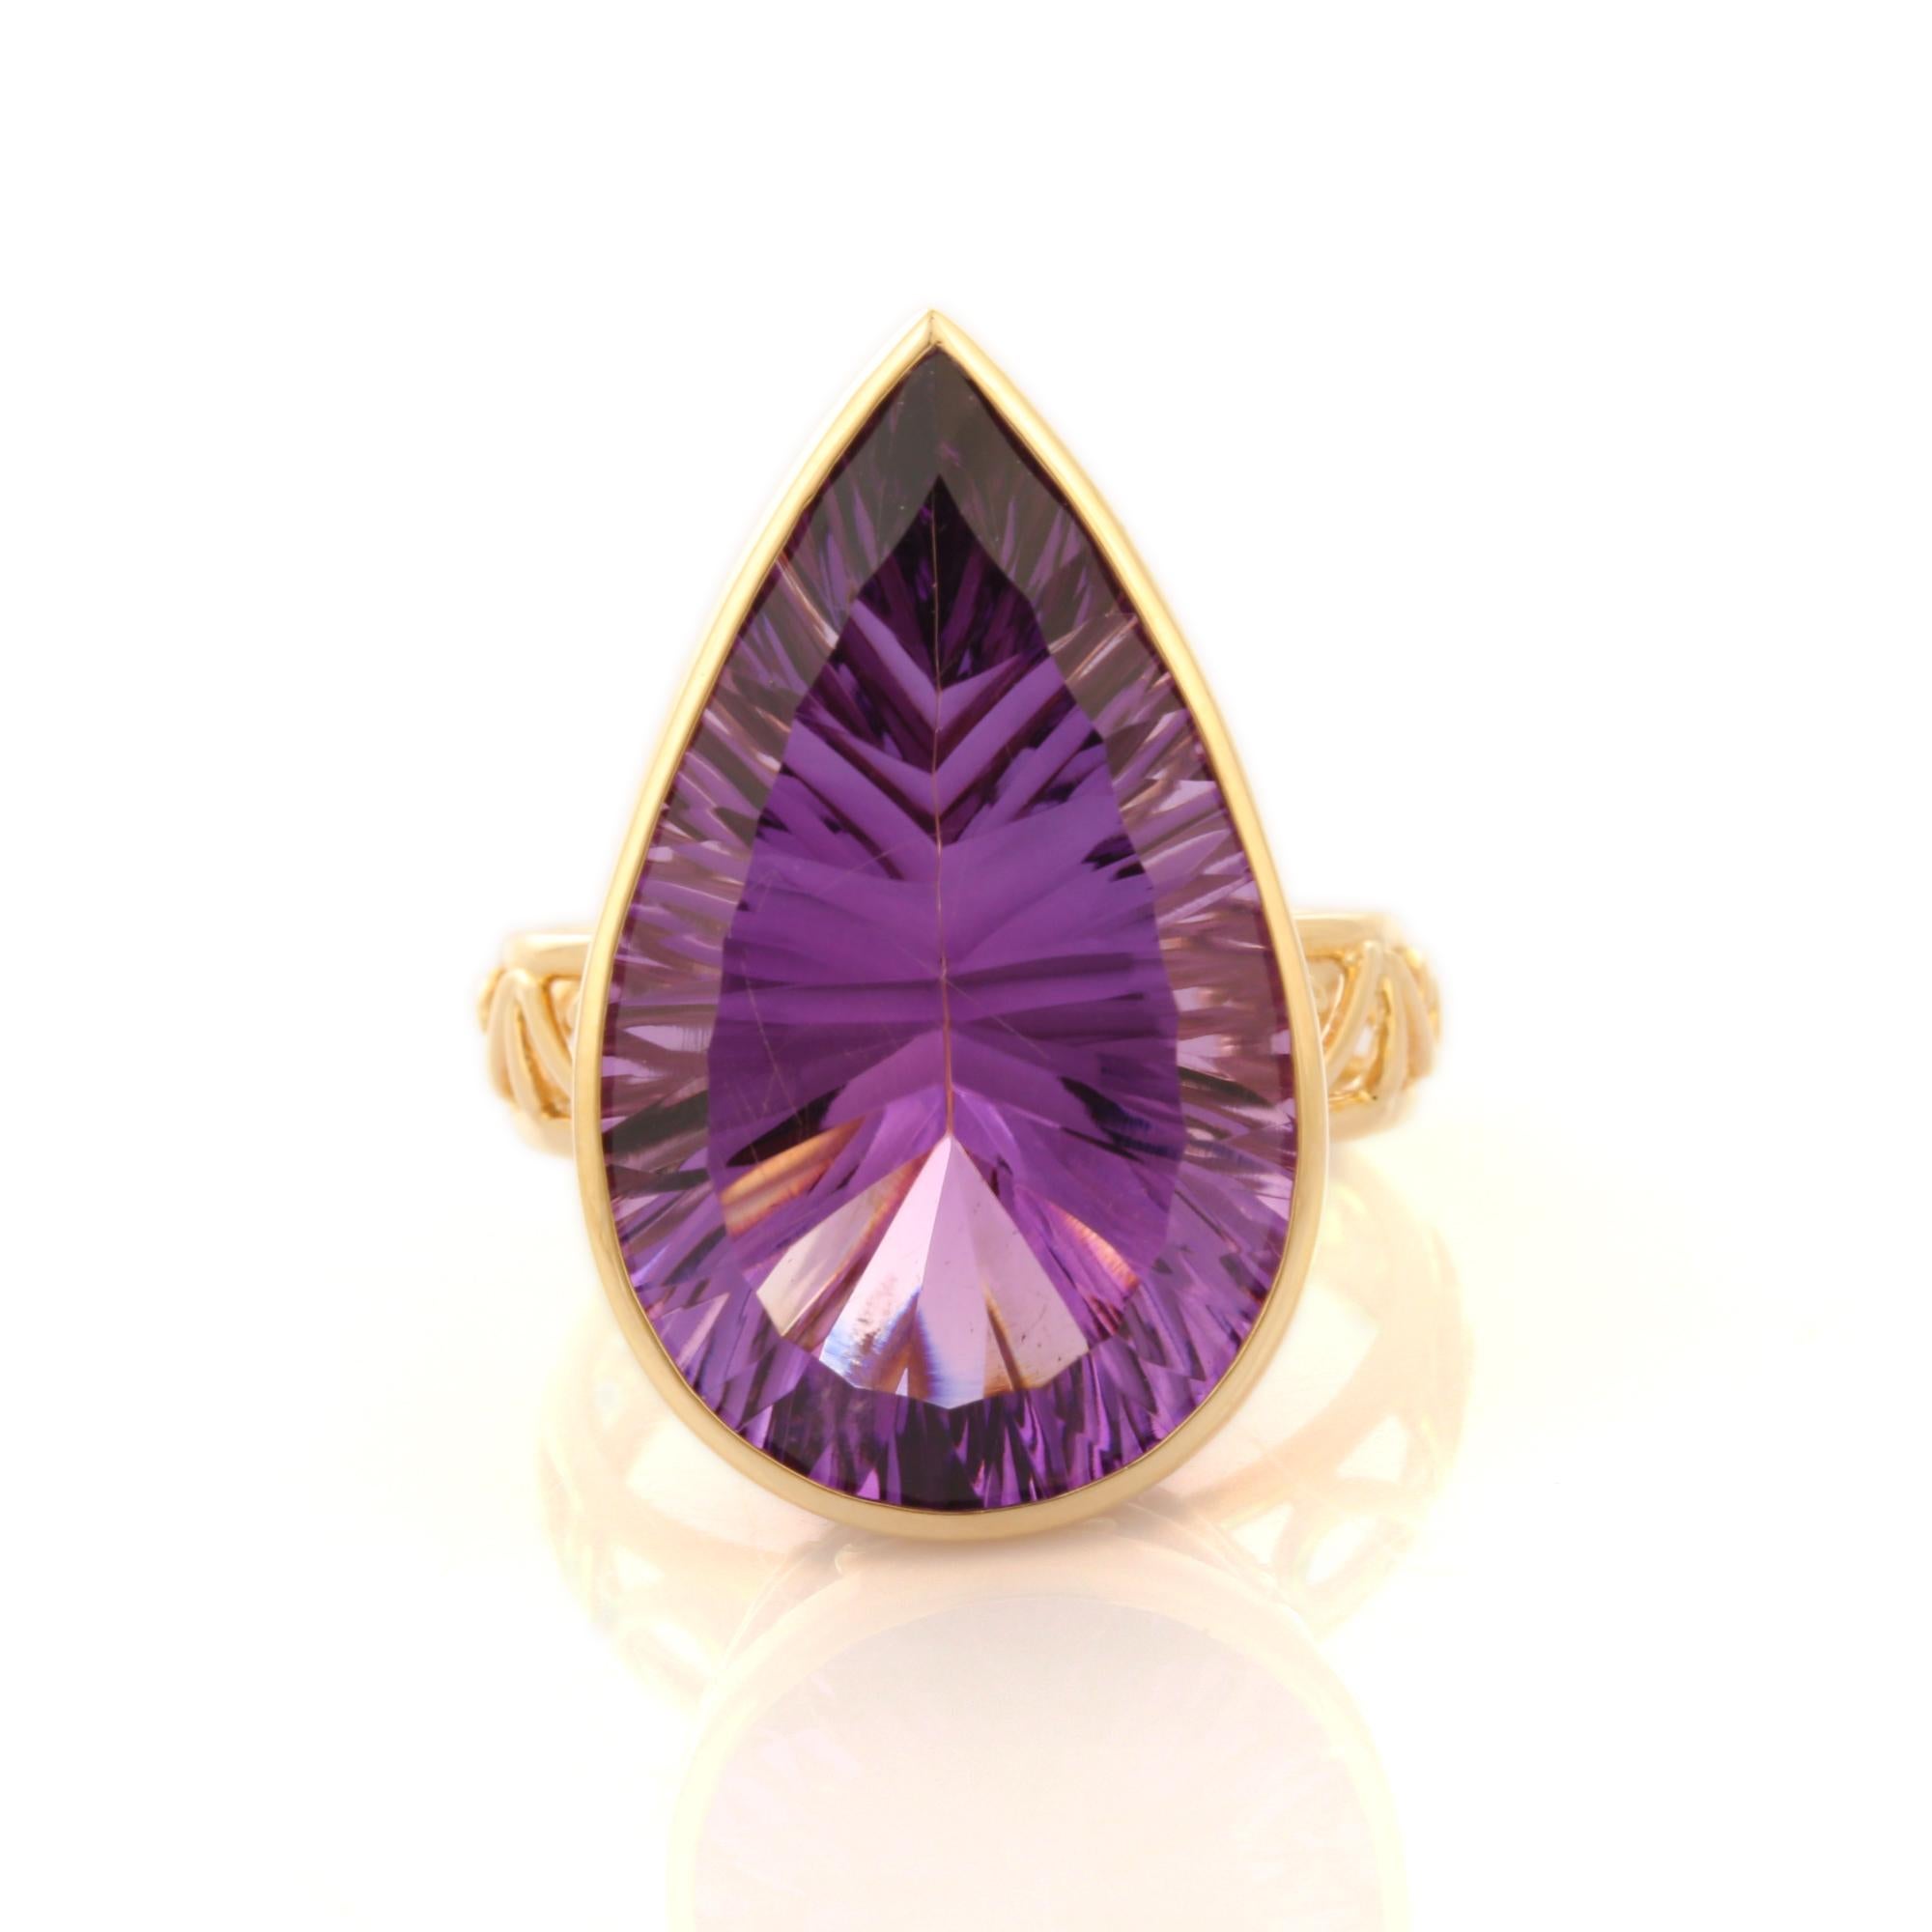 For Sale:  18.2 Carat Pear Cut Amethyst Cocktail Ring in 14K Yellow Gold 9